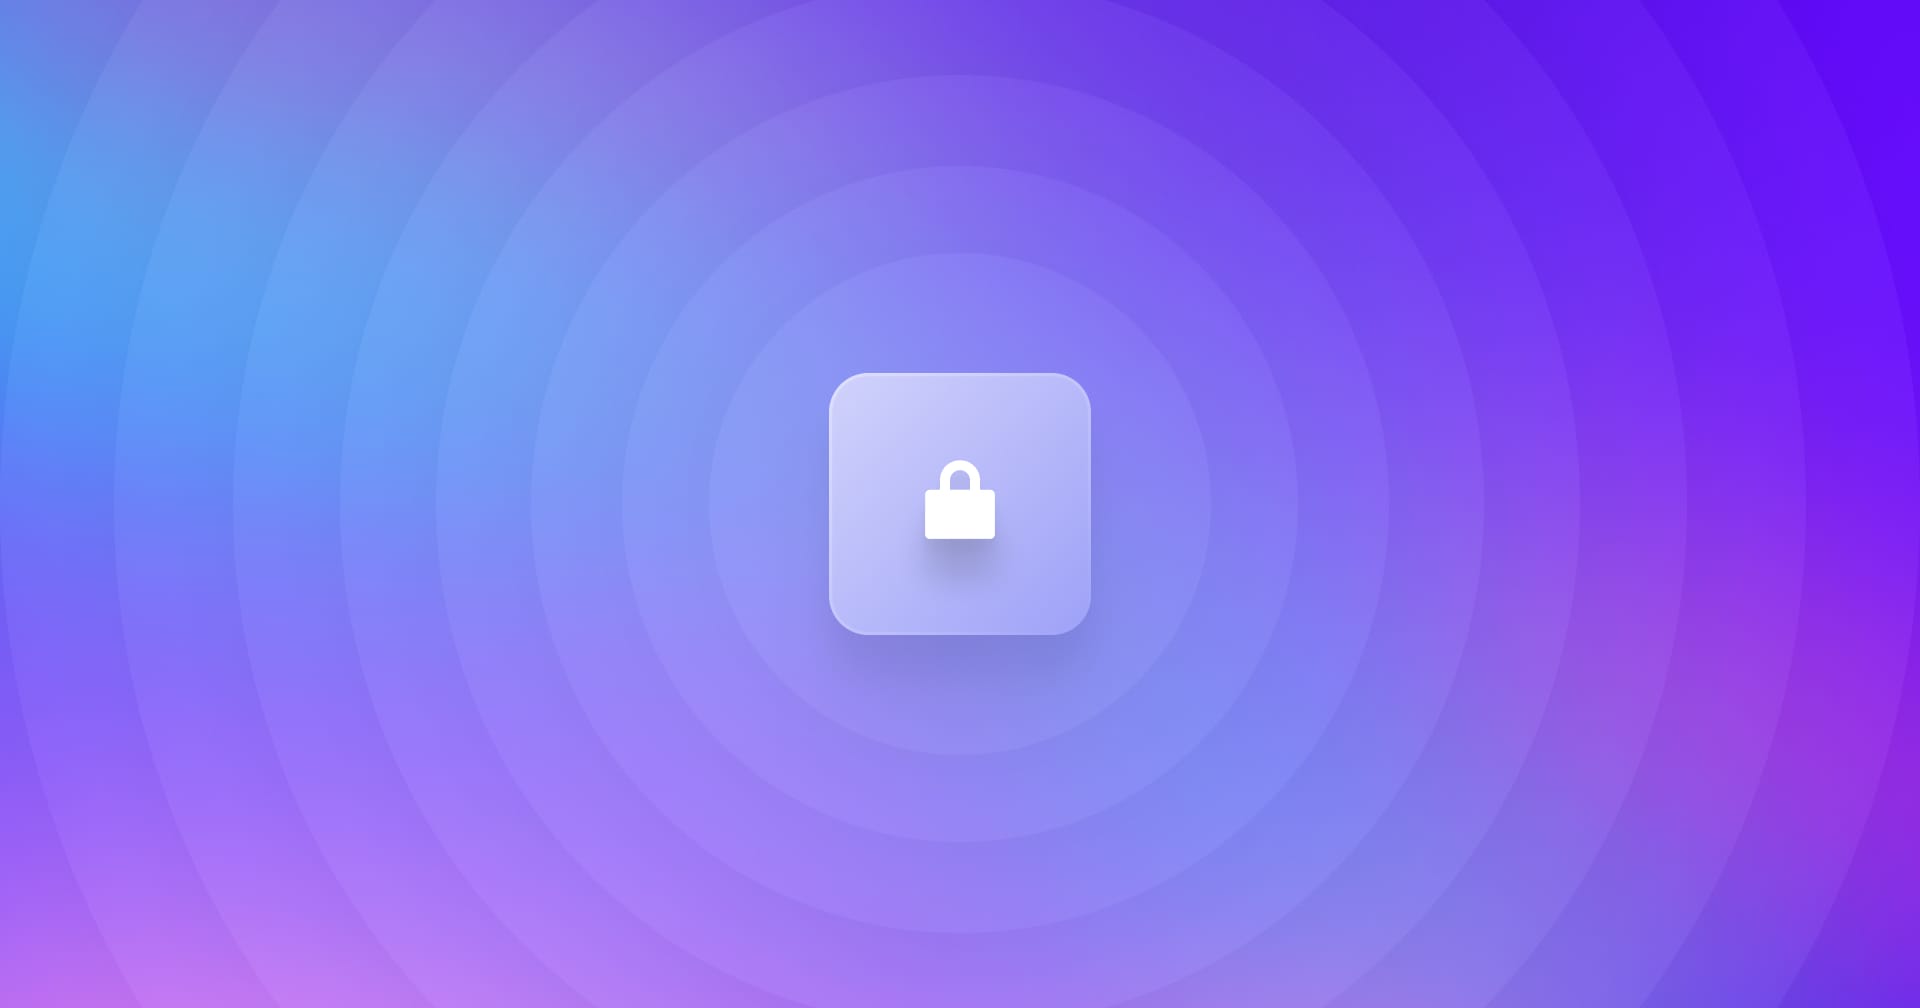 A lock icon with circles radiating outward around it over a gradient background